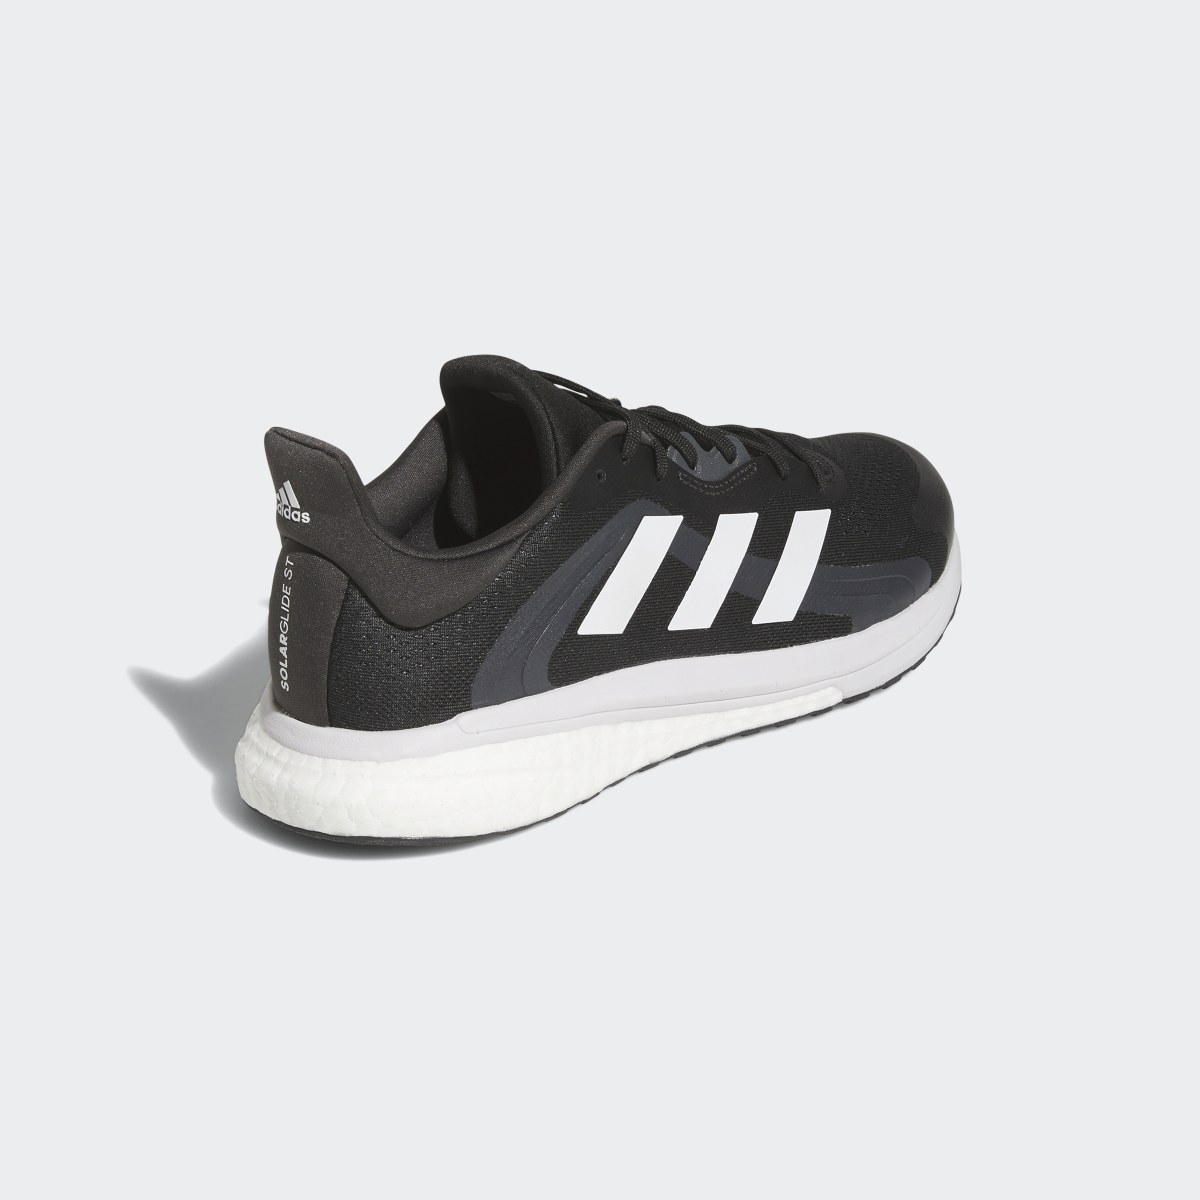 Adidas SolarGlide 4 ST Shoes. 10